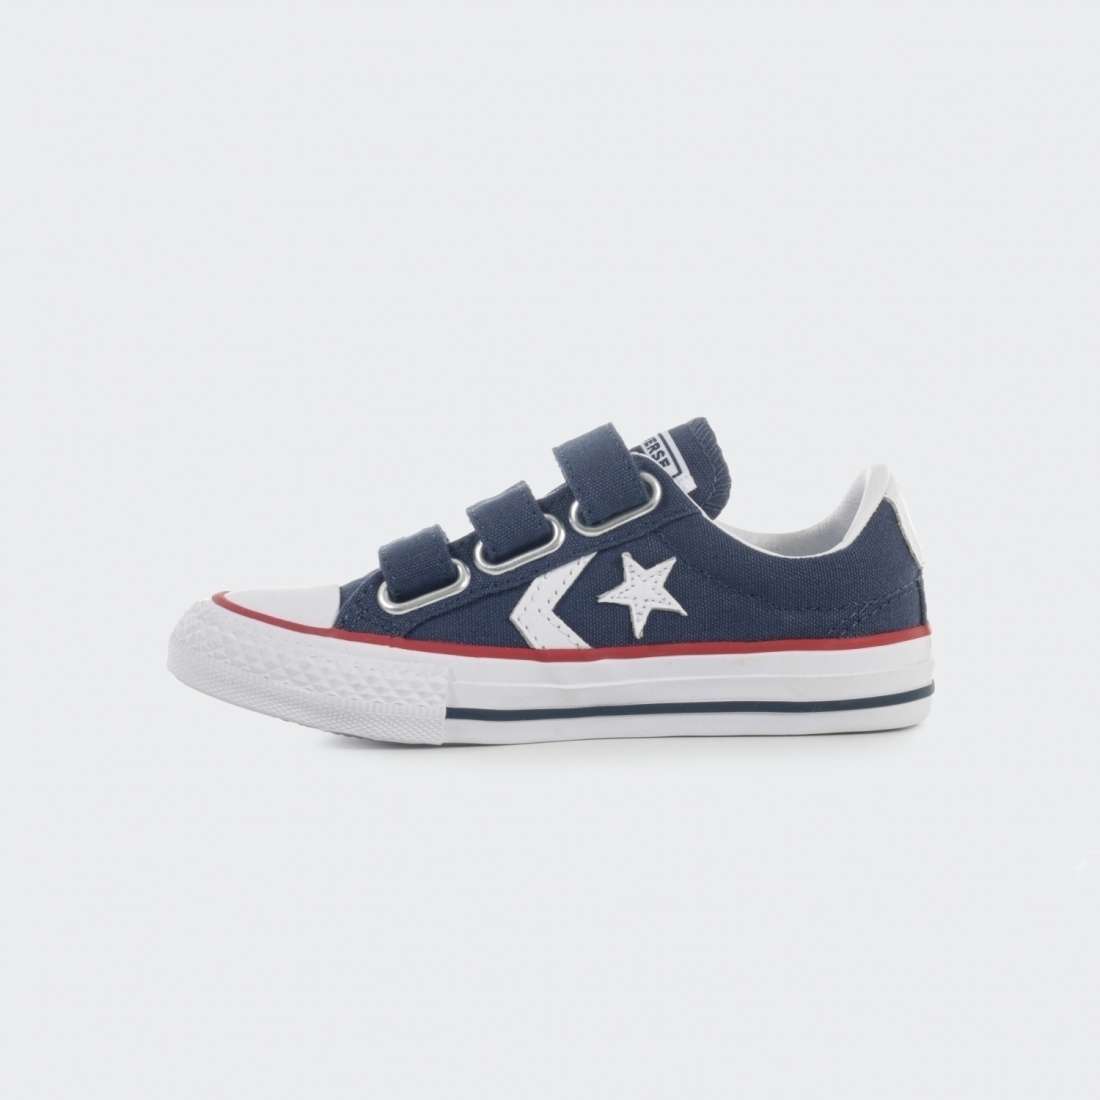 CONVERSE ALL STAR PLAYER 3V NAVY/WHITE/RED